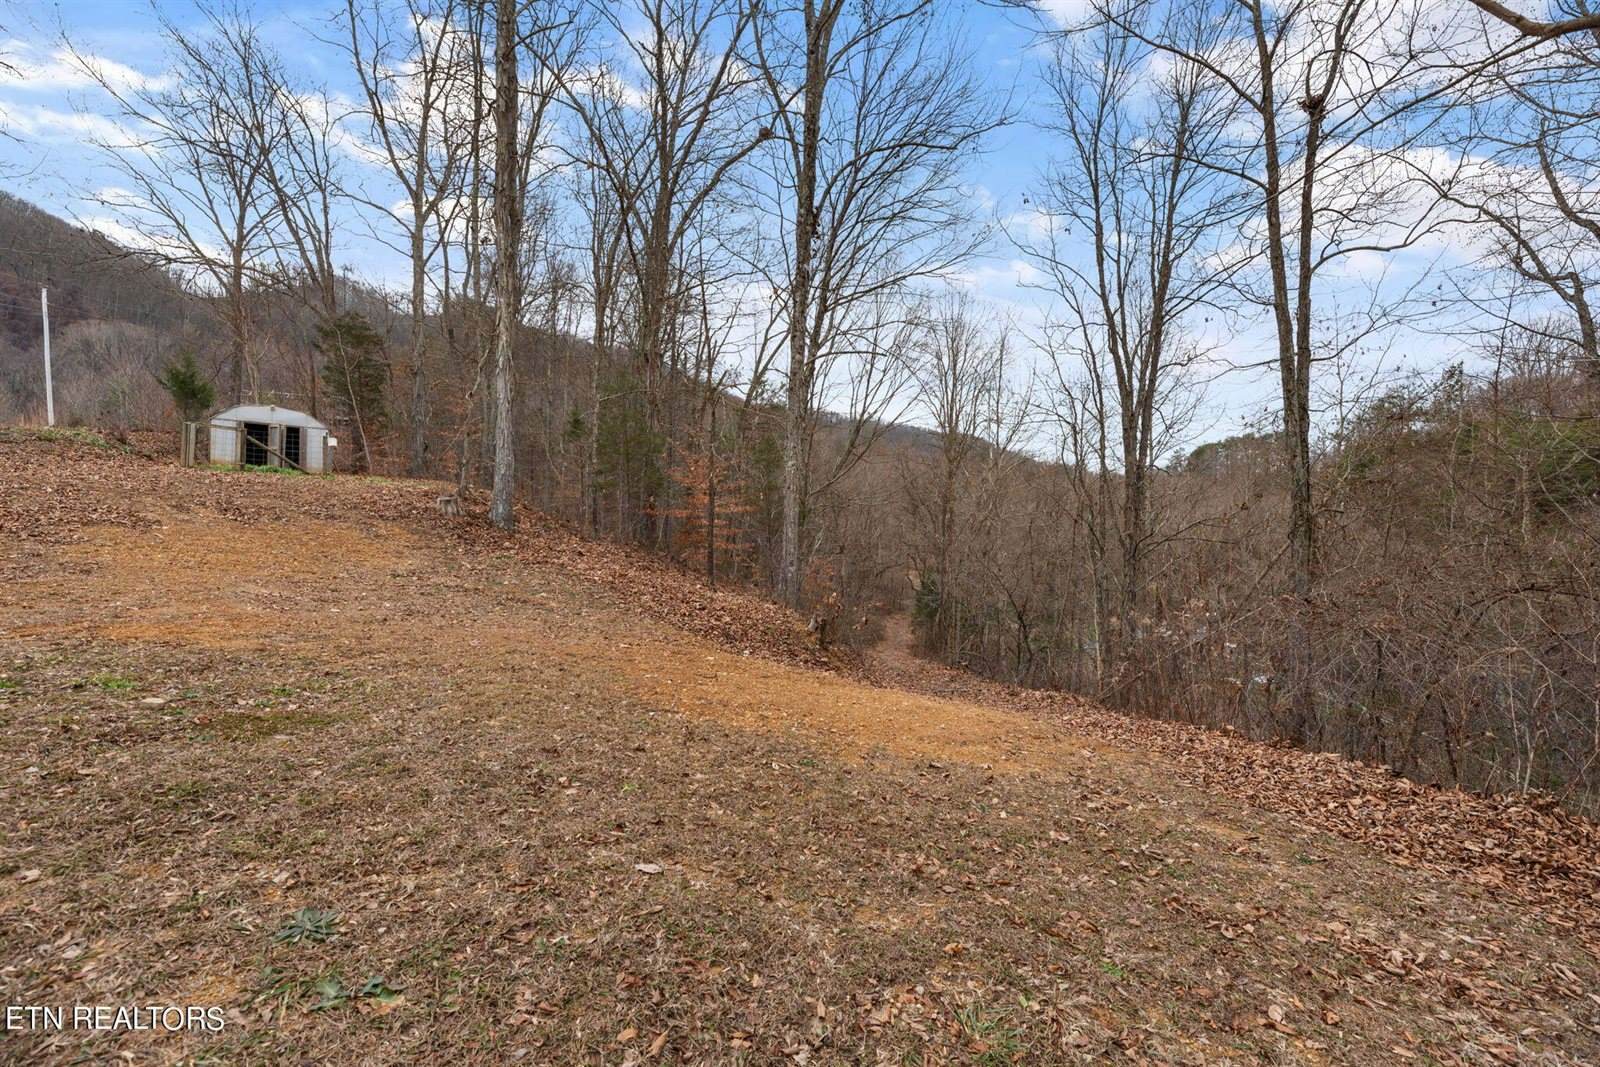 7448 East Highway 25E, Thorn Hill, TN 37881